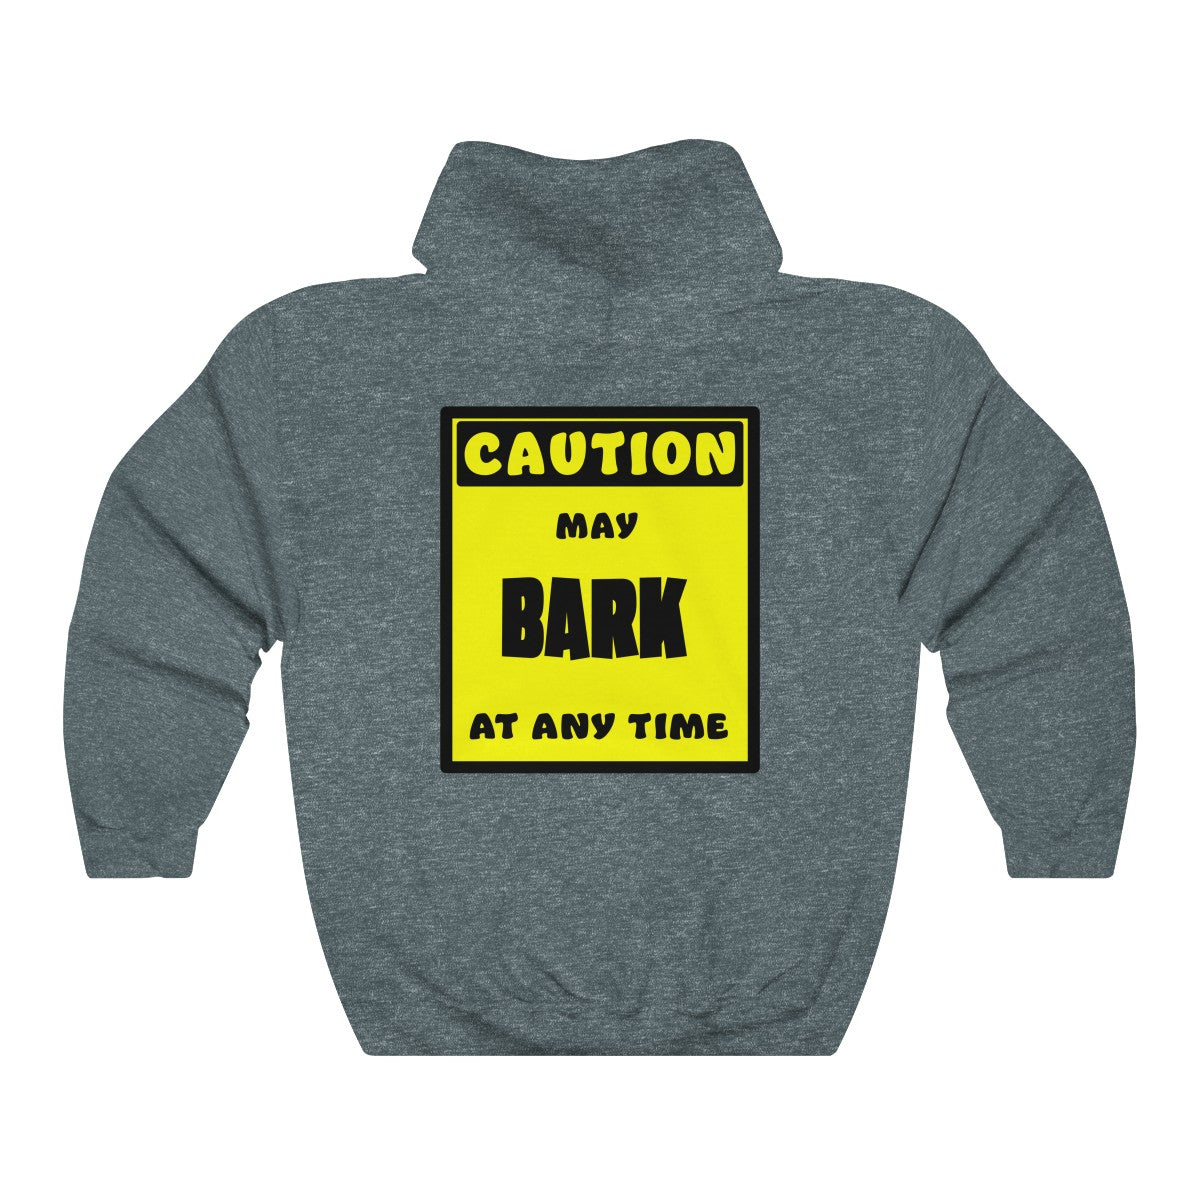 CAUTION! May BARK at any time! - Hoodie Hoodie AFLT-Whootorca Dark Heather S 